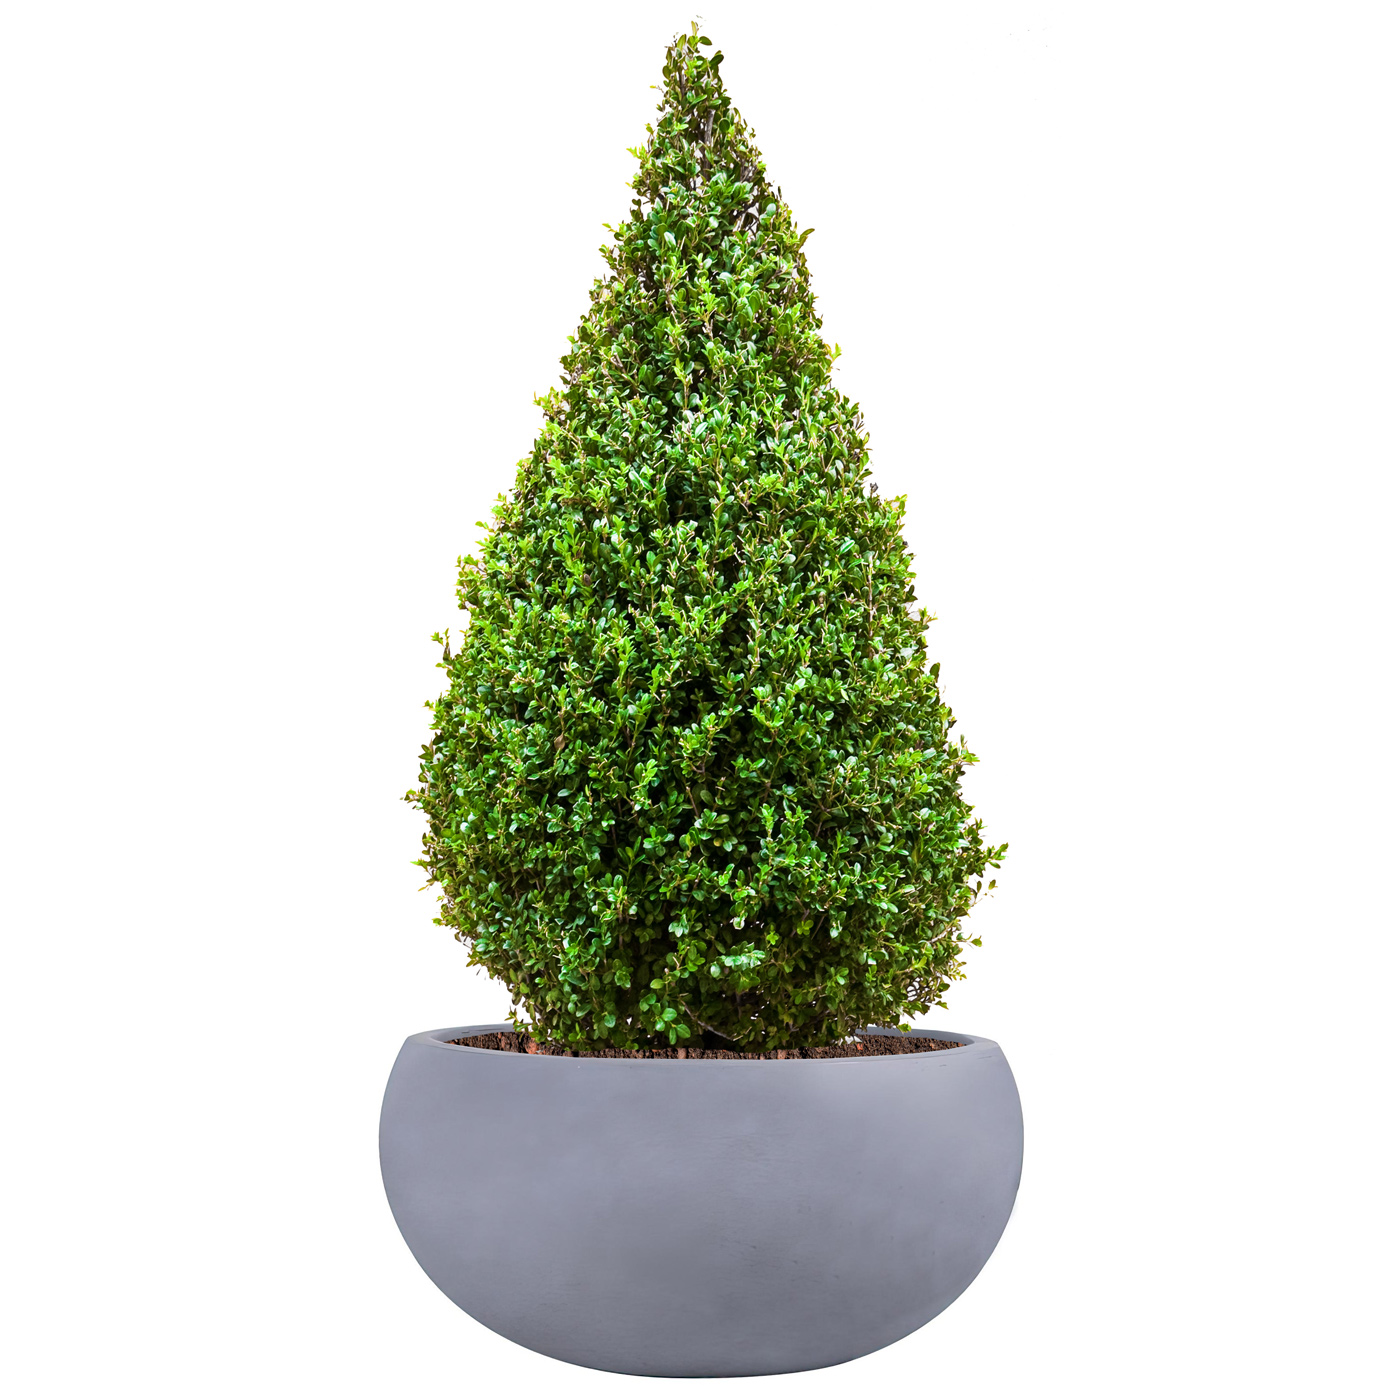 Classic Smooth Light Grey Bowl Outdoor Planter D44 H21 cm, 31.9 ltrs Cap.